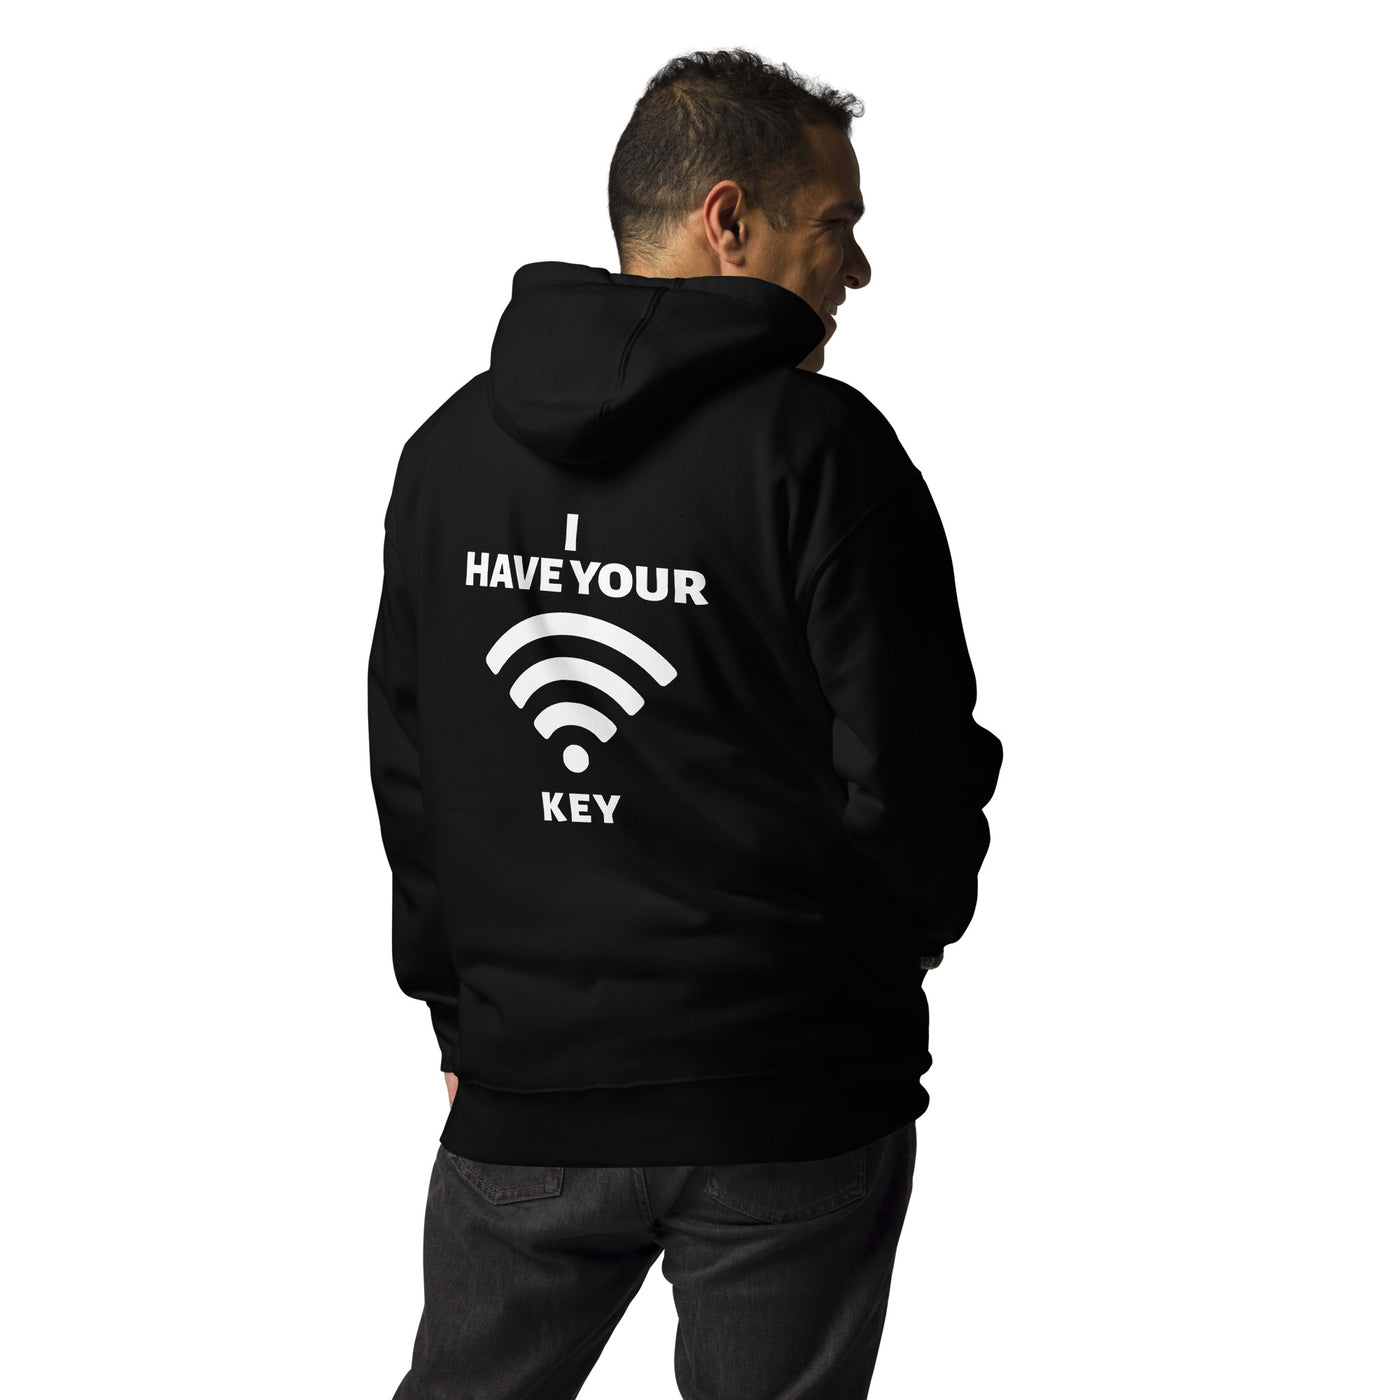 I have your Wi-Fi password - Unisex Hoodie ( Back Print )